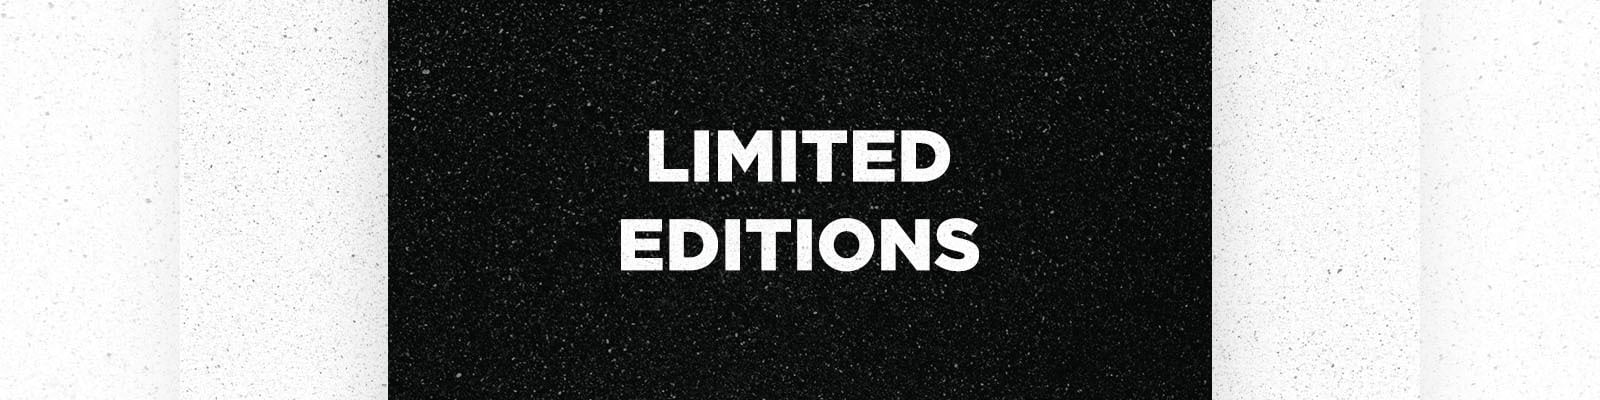 Limited Editions